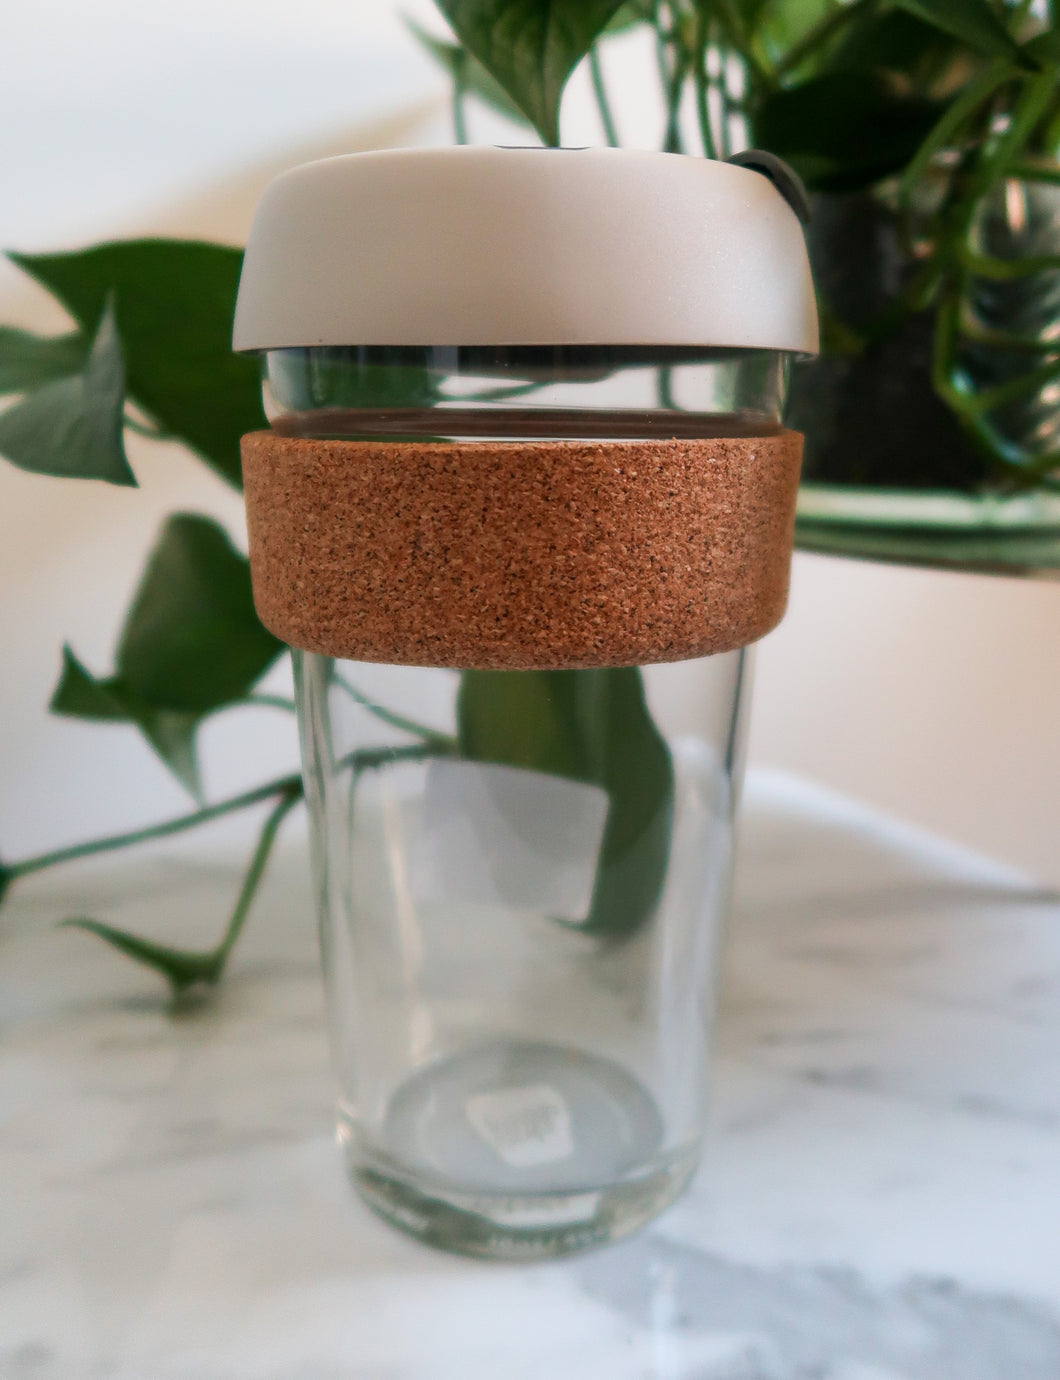 KeepCup review: Is the reusable cork coffee cup worth buying